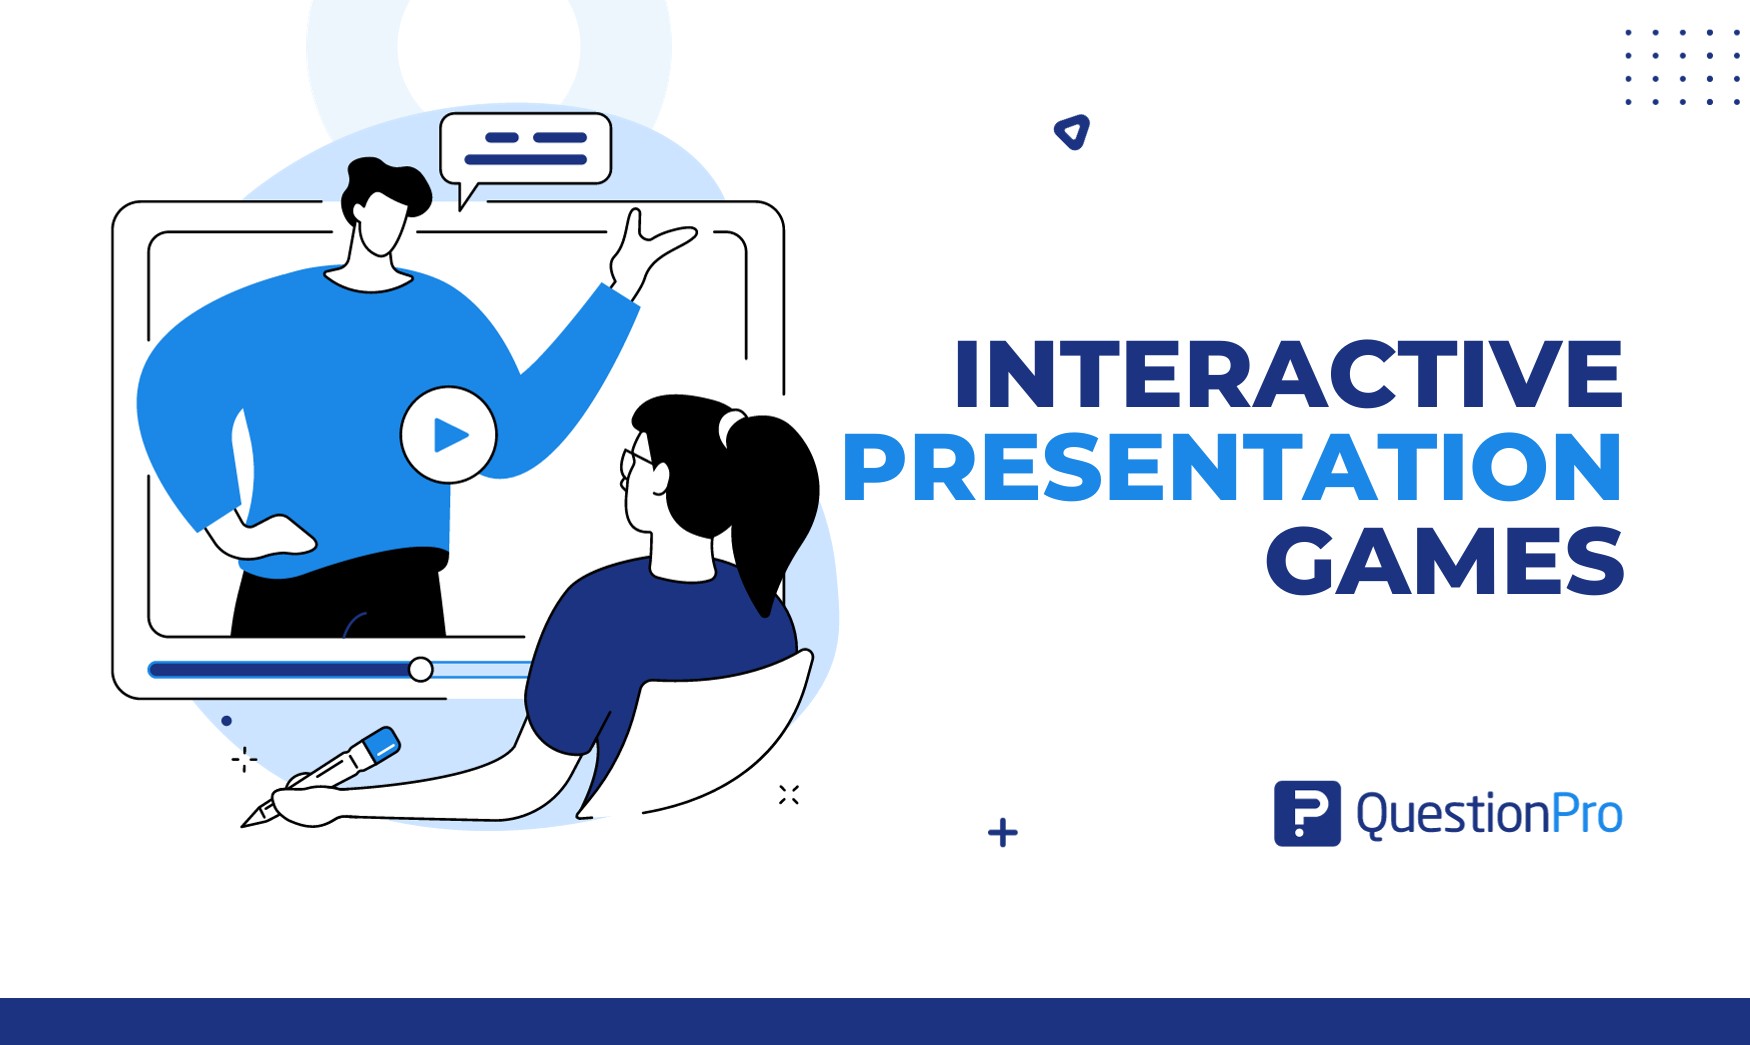 From quizzes to polls, captivate your audience and make your presentations unforgettable with 15 interactive presentation games.